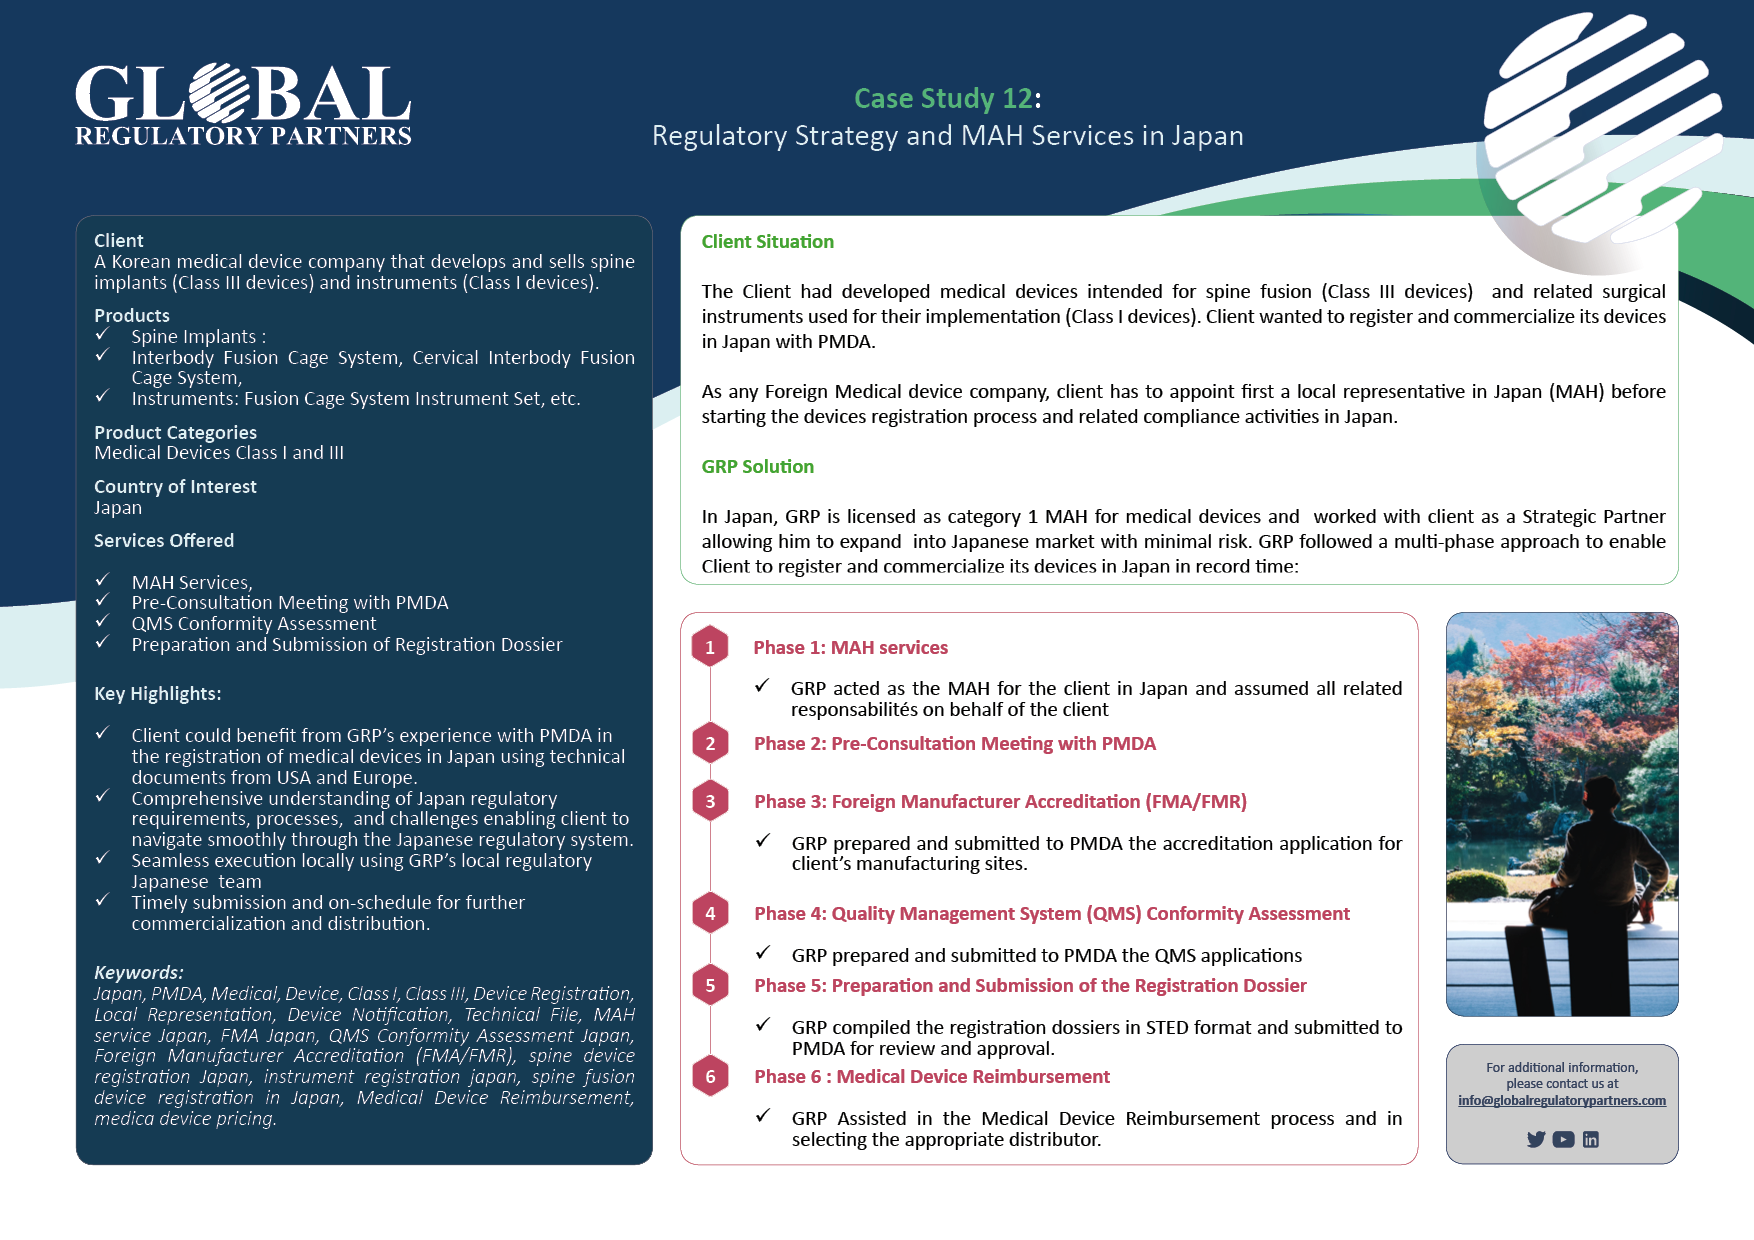 Case Study 12: Regulatory Strategy and MAH Services in Japan